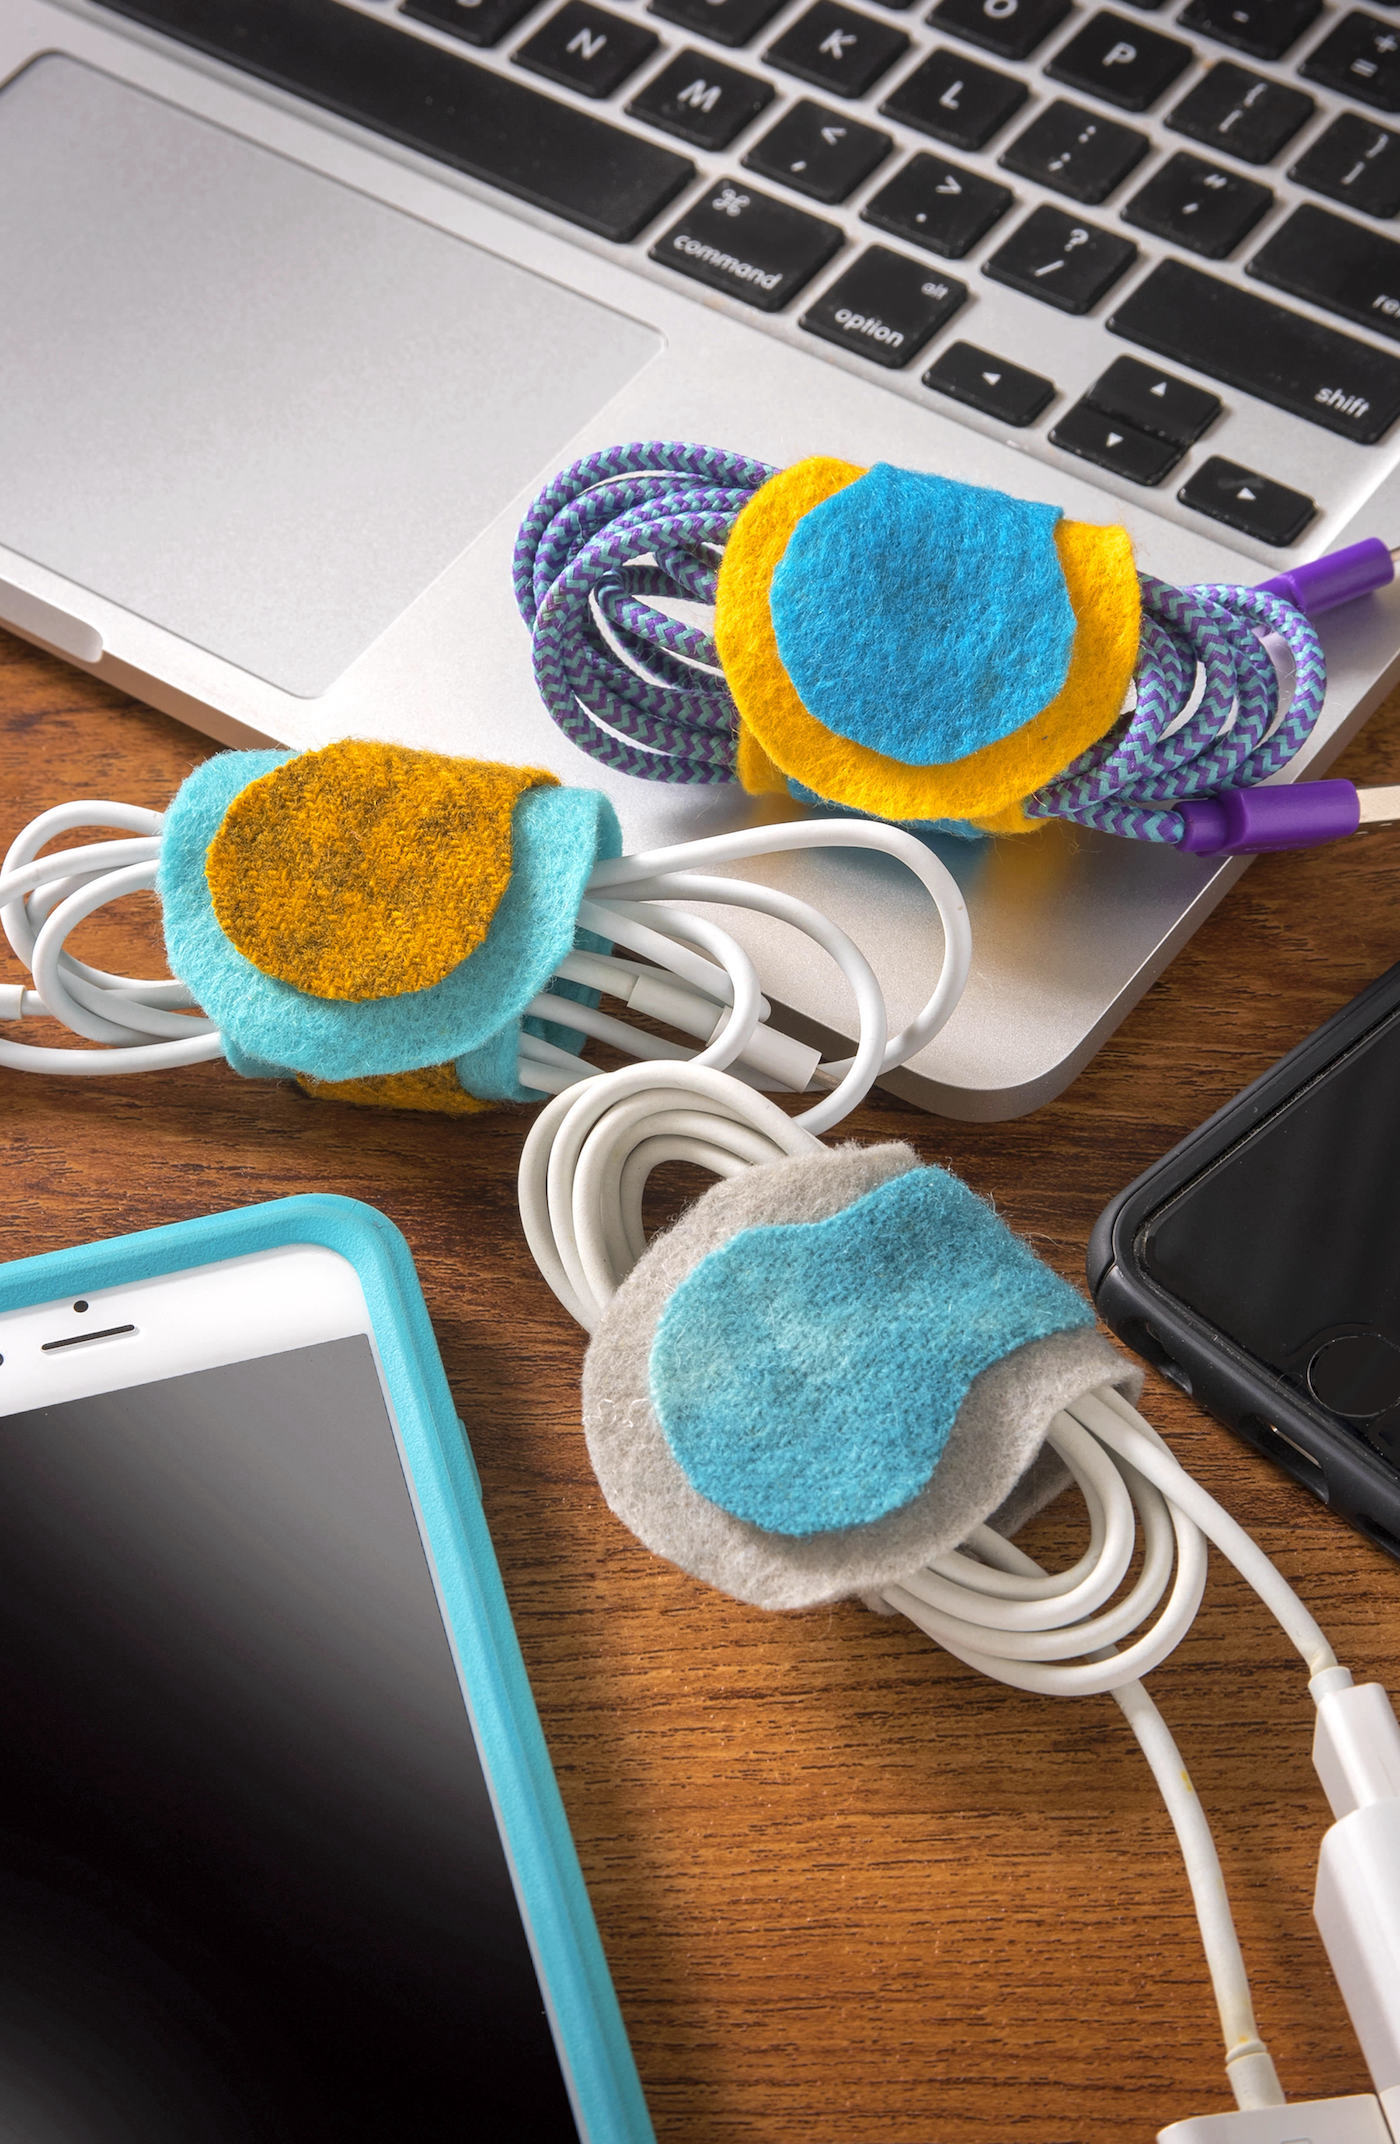 DIY cable organizers made from felt